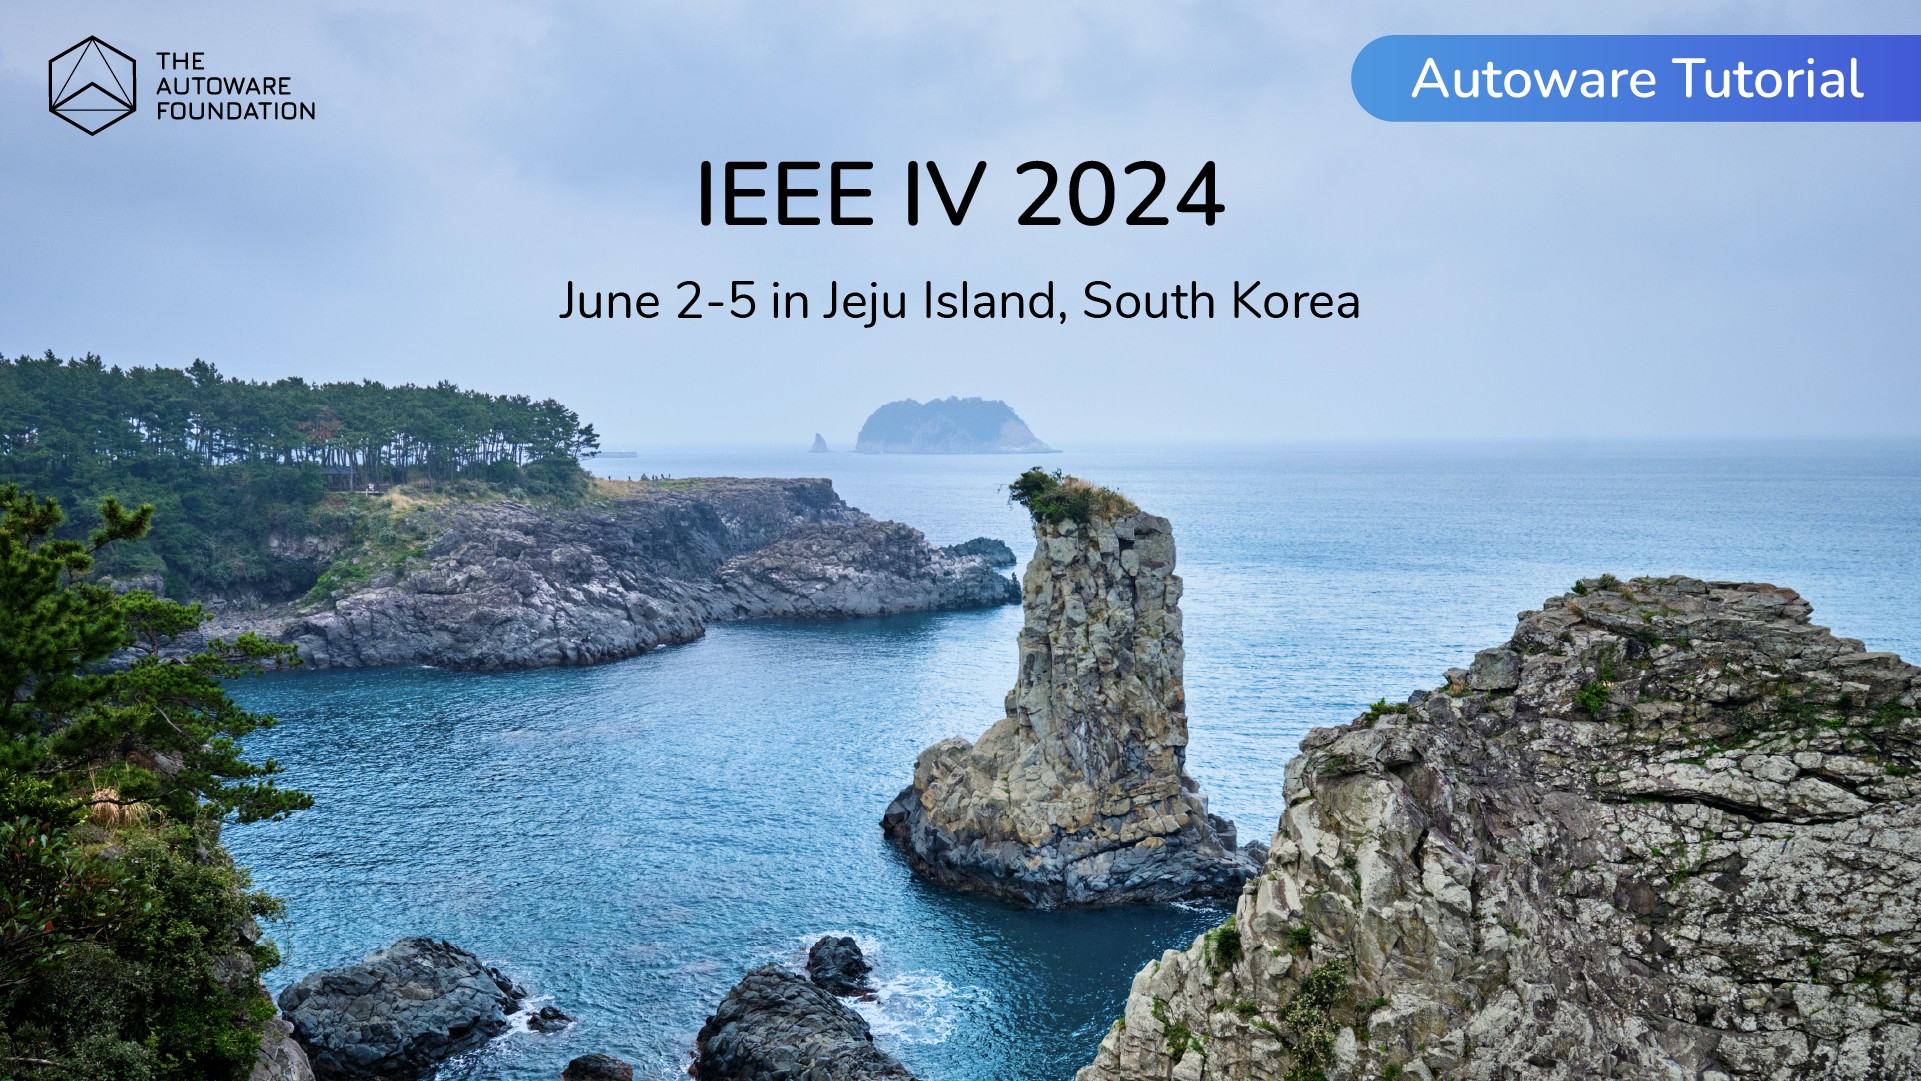 Autoware Tutorial at the IEEE IV 2024